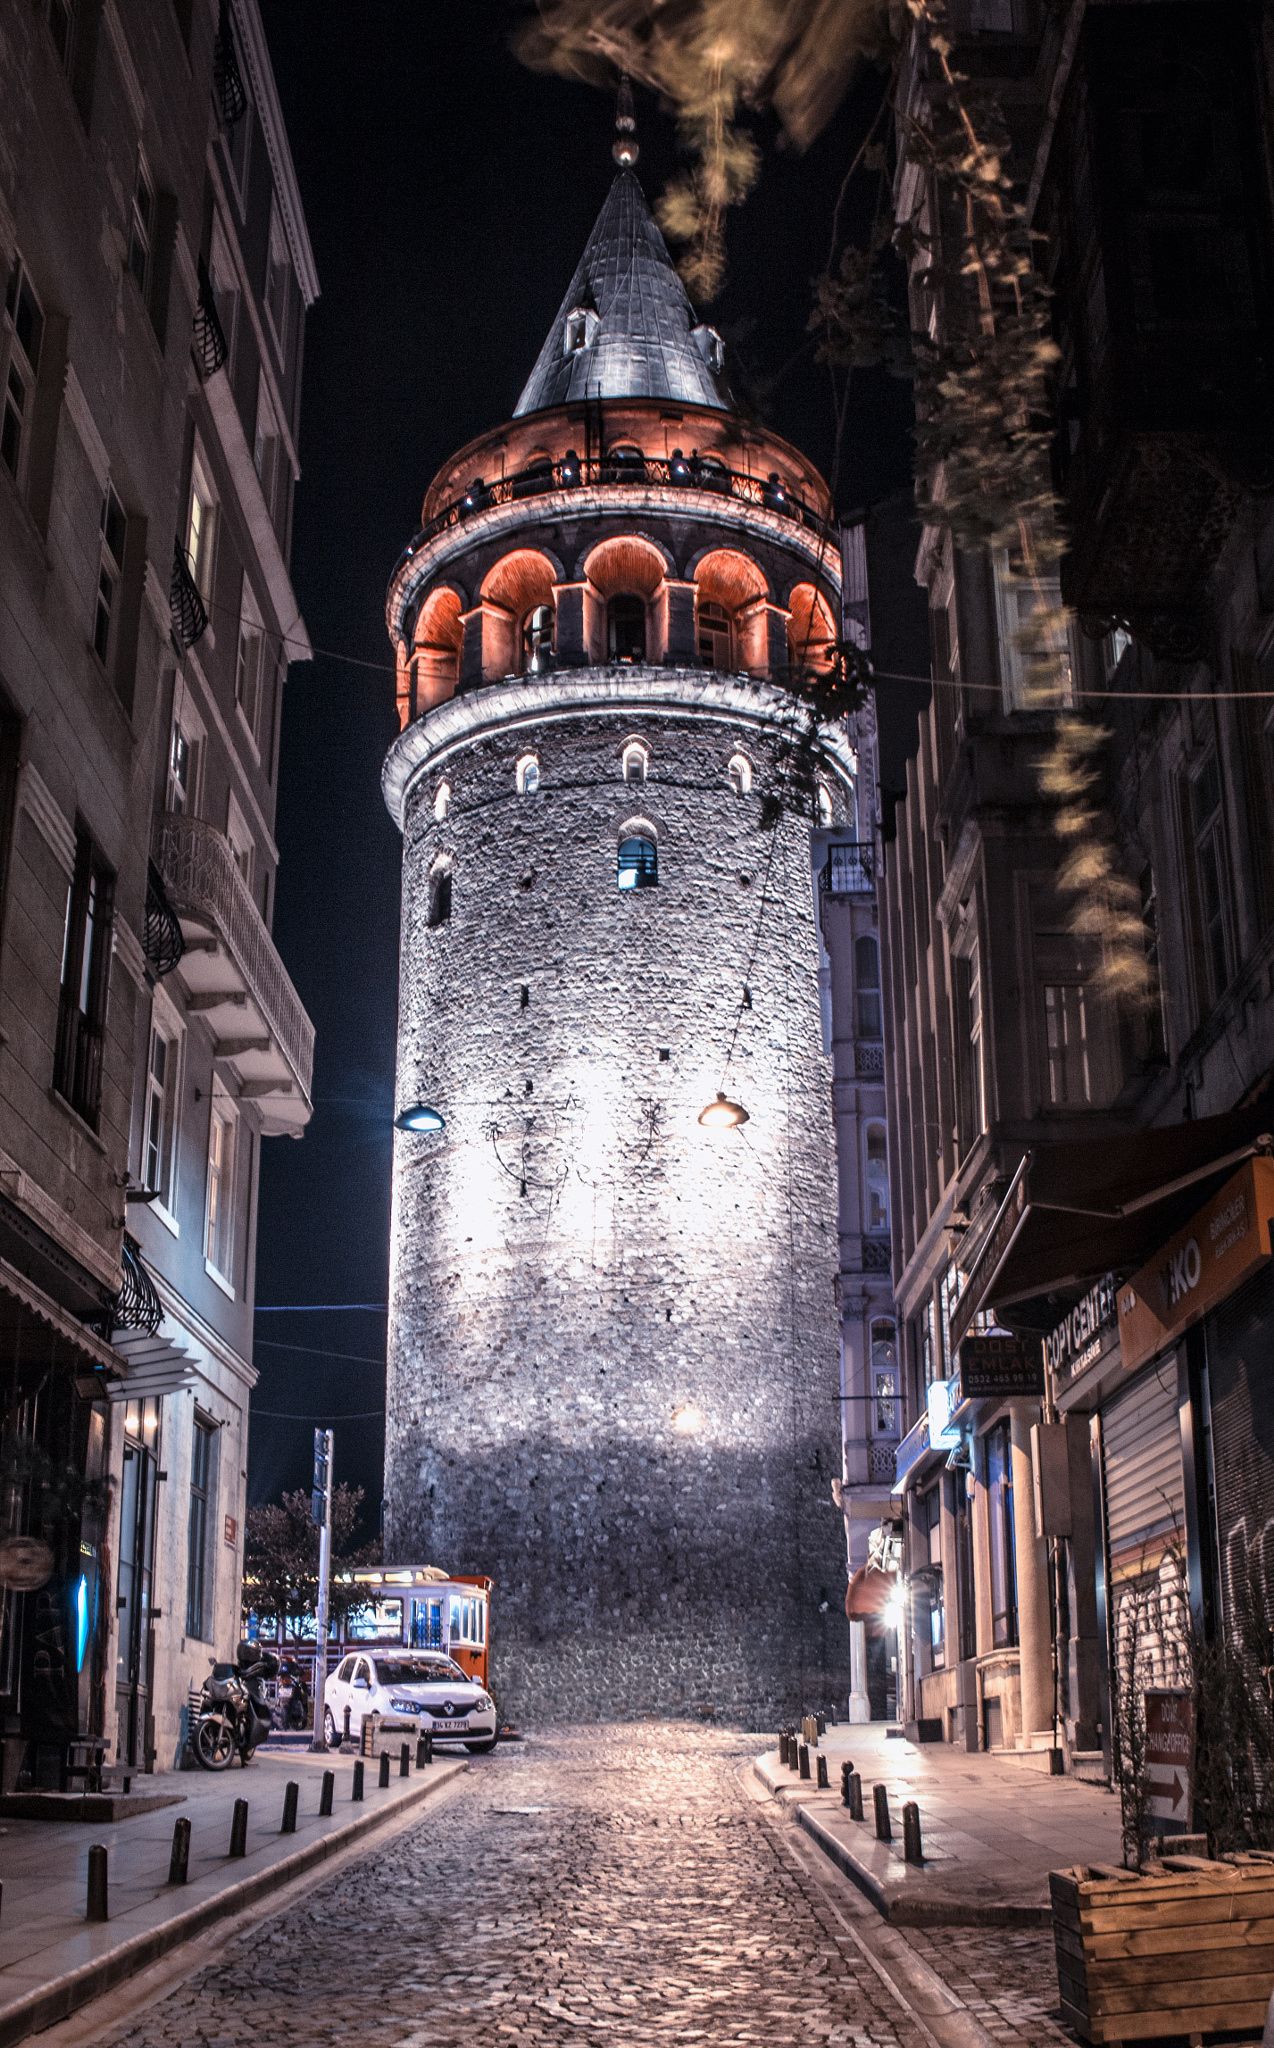 Galata tower,Istanbul | | g a l a t a t o w e r | | Pinterest | Tower